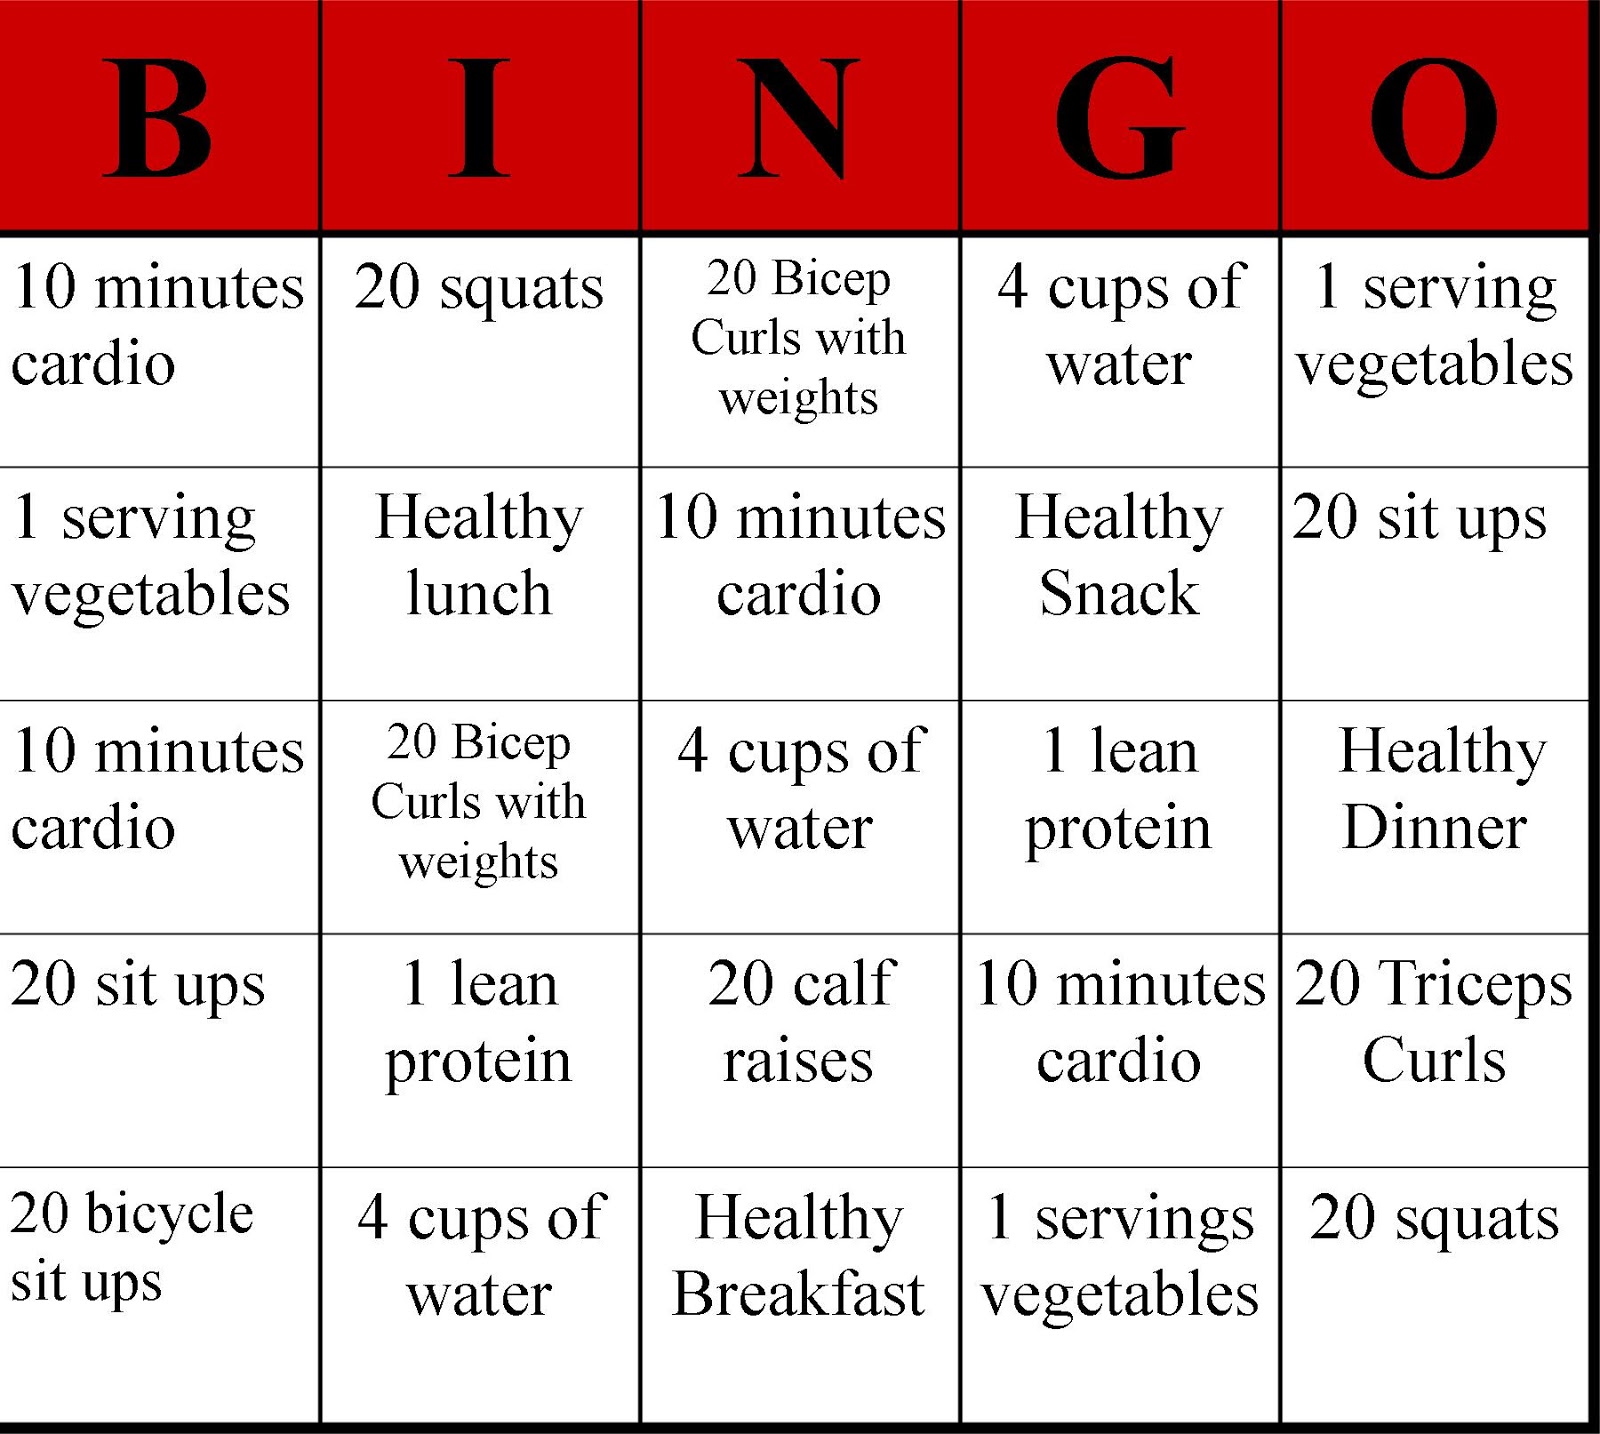 muffins-vs-muffintop-exercise-bingo